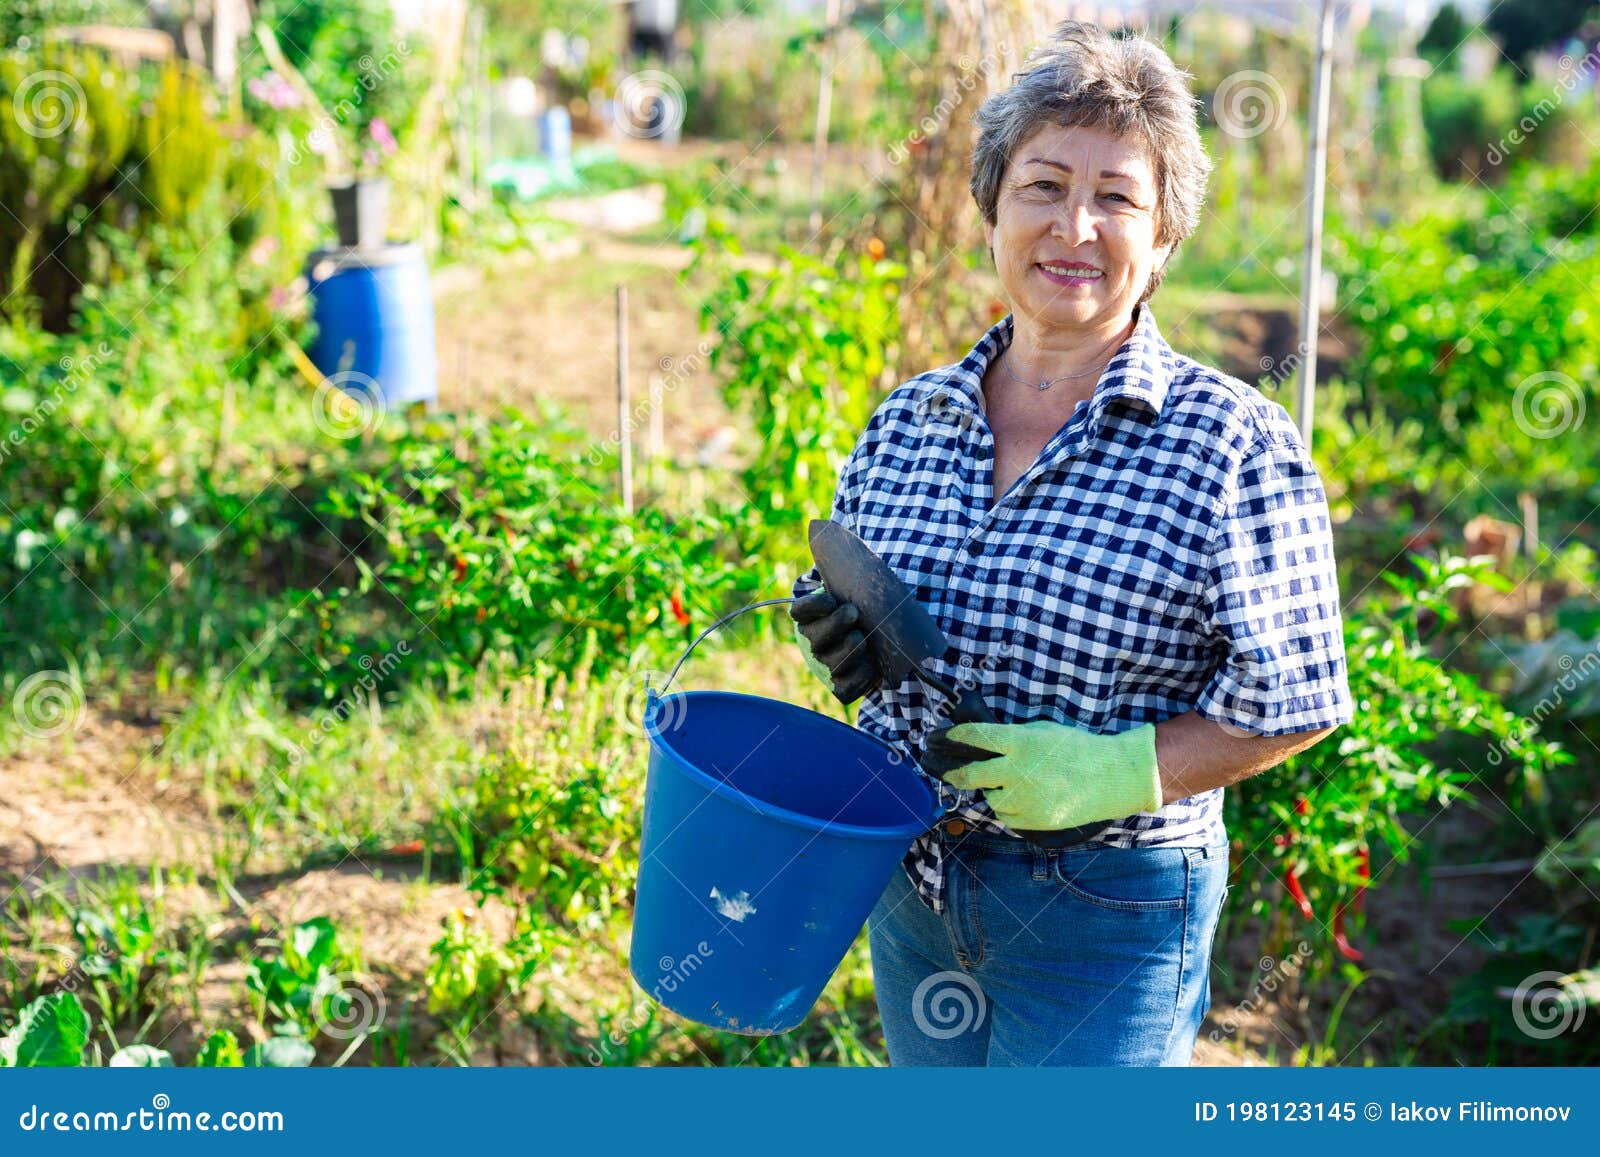 mature woman having horticultural instruments in garden on day